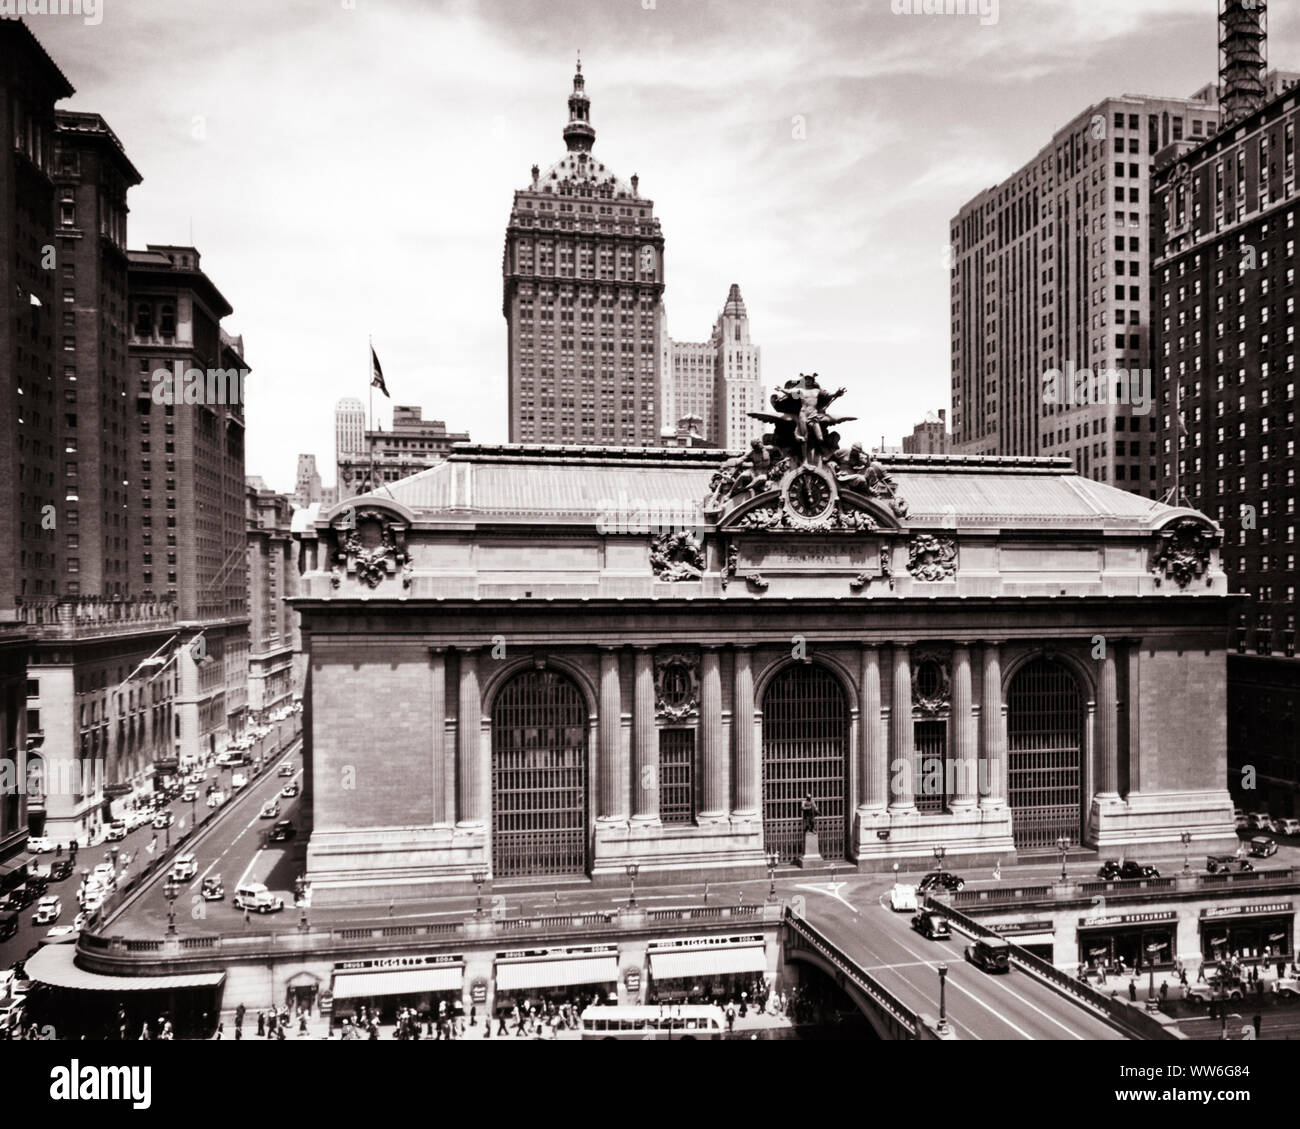 1930s EXTERIOR OF GRAND CENTRAL STATION ON 42ND STREET BUILT 1913 IN BEAUX ARTS STYLE MANHATTAN NEW YORK CITY USA - q36120 CPC001 HARS BUILT CREATIVITY NATIONAL HISTORIC LANDMARK 42ND STREET BEAUX ARTS BLACK AND WHITE OLD FASHIONED Stock Photo